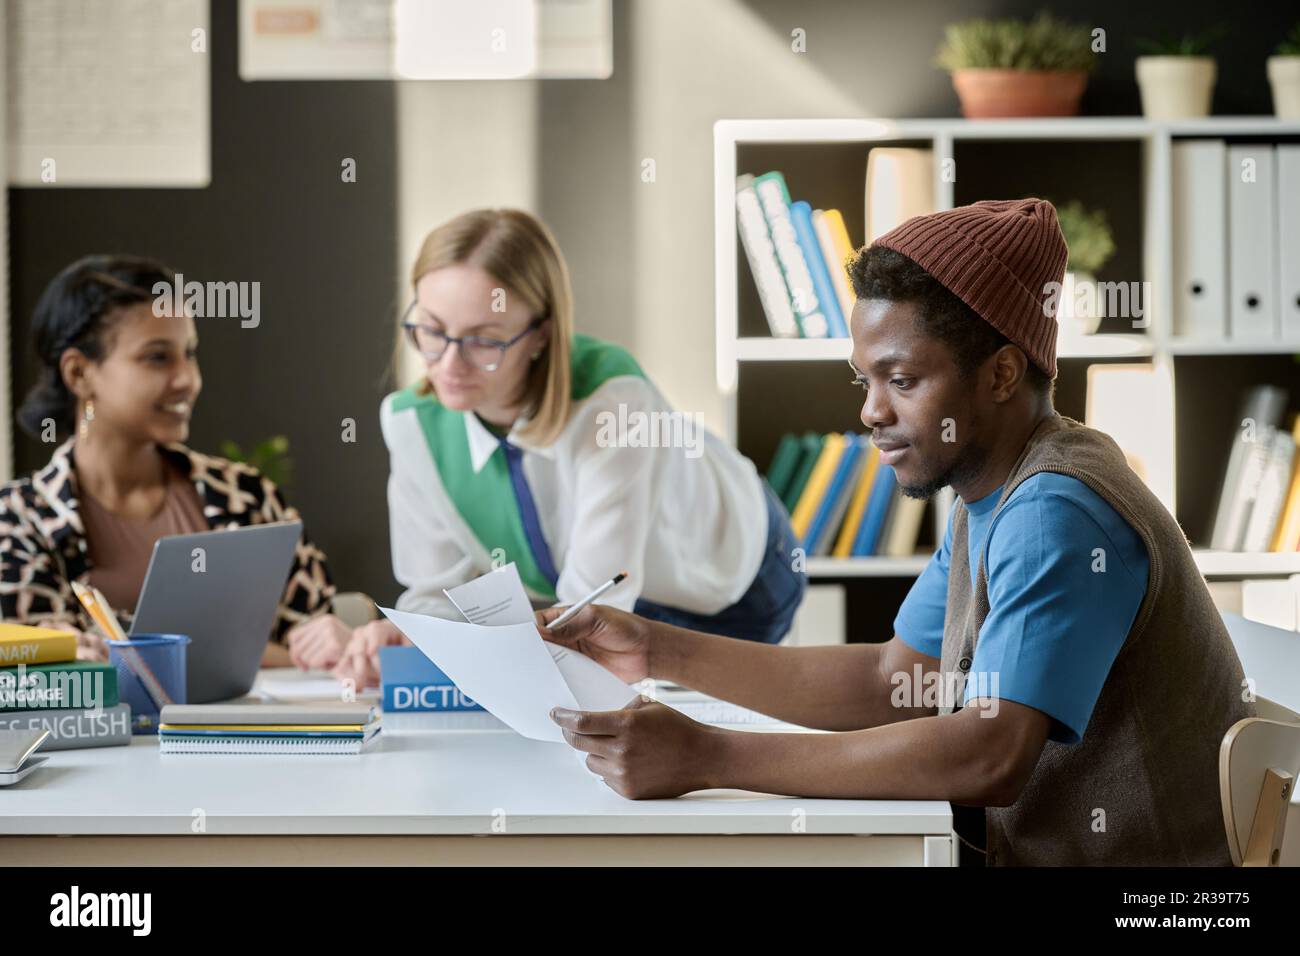 African American student studying English in English school together with other students Stock Photo